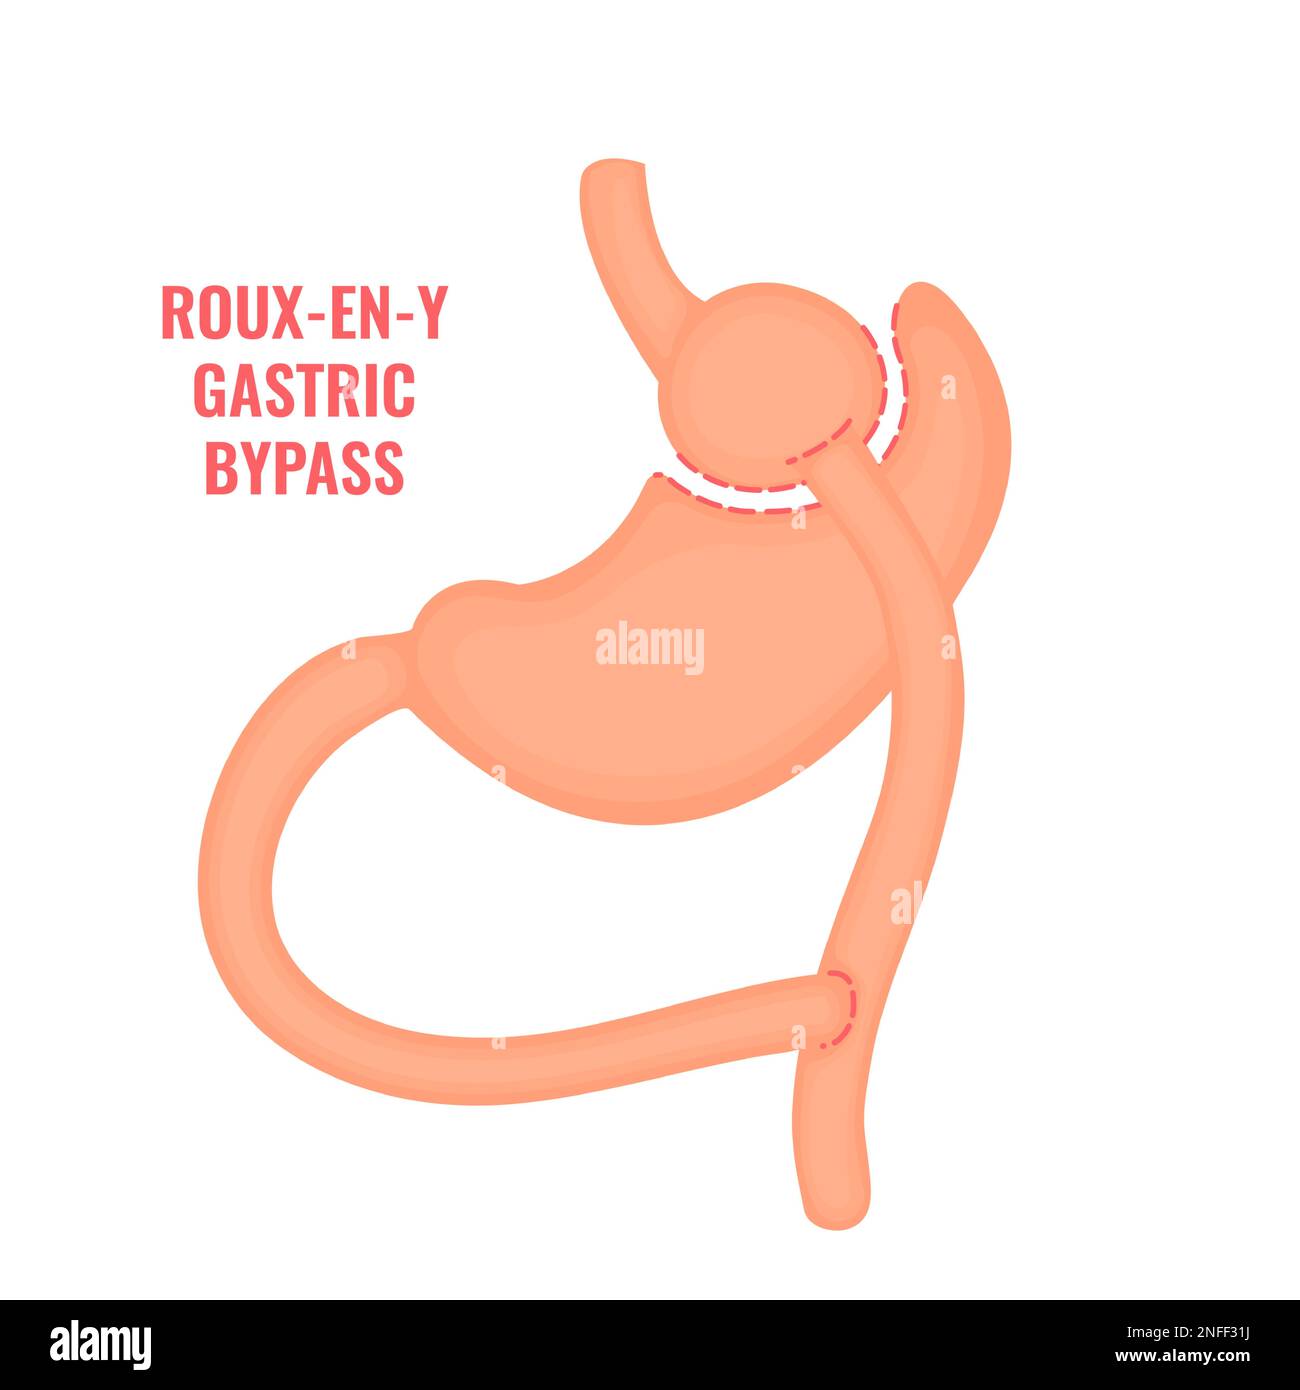 Roux-en-y gastric bypass bariatric surgery weight loss infographics Stock Vector